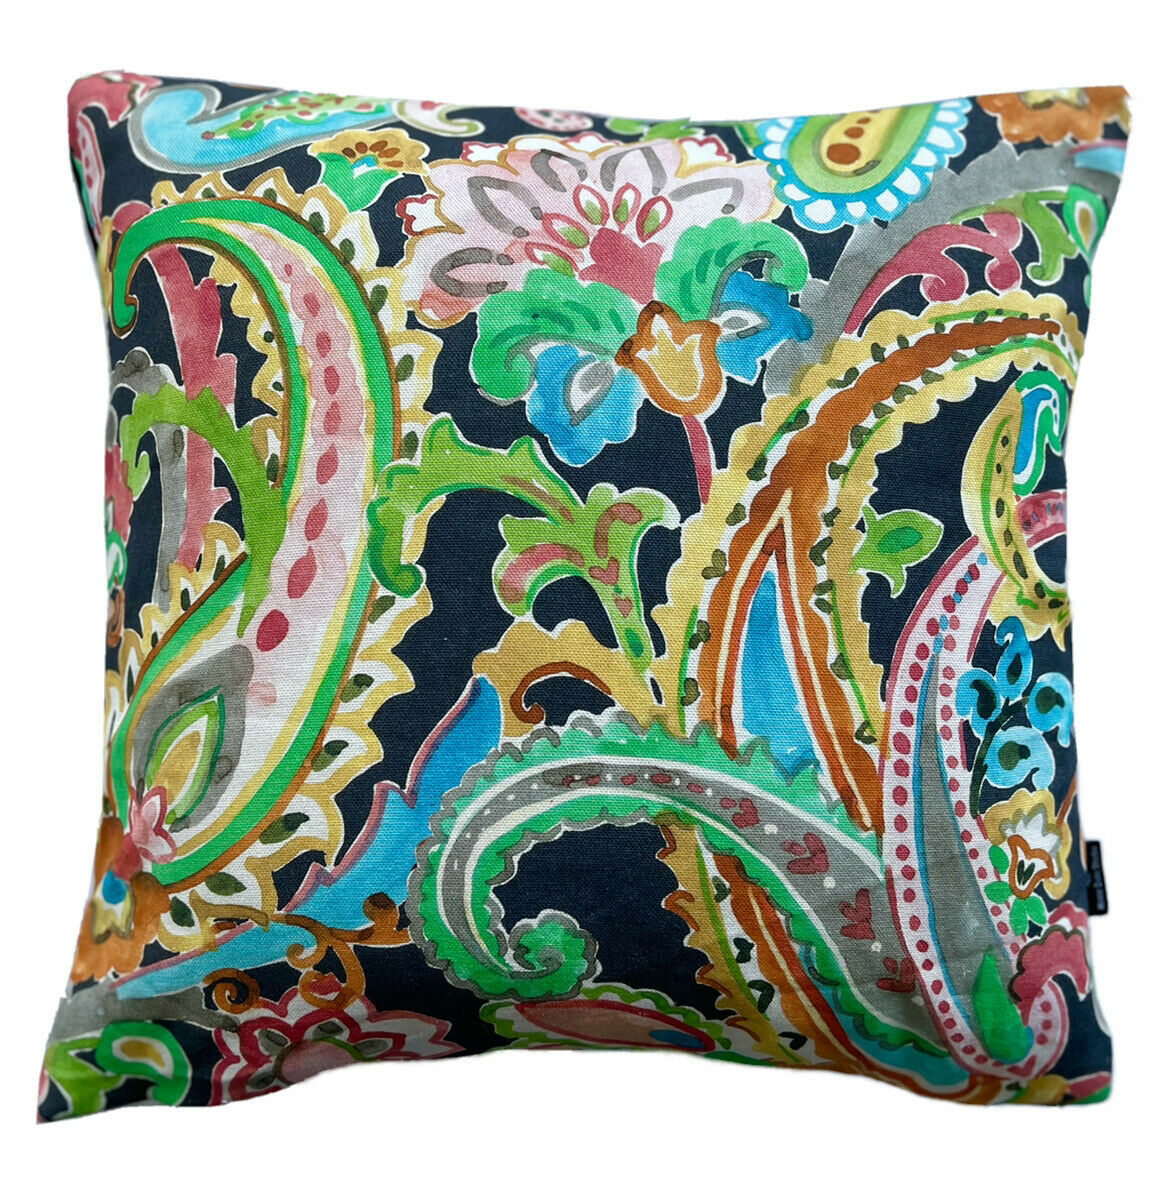 Spring Paisley Cushion Cover Black Throw Pillow Case Vibrant Sofa Décor Turquoise Yellow Pink Green Floral Botanical